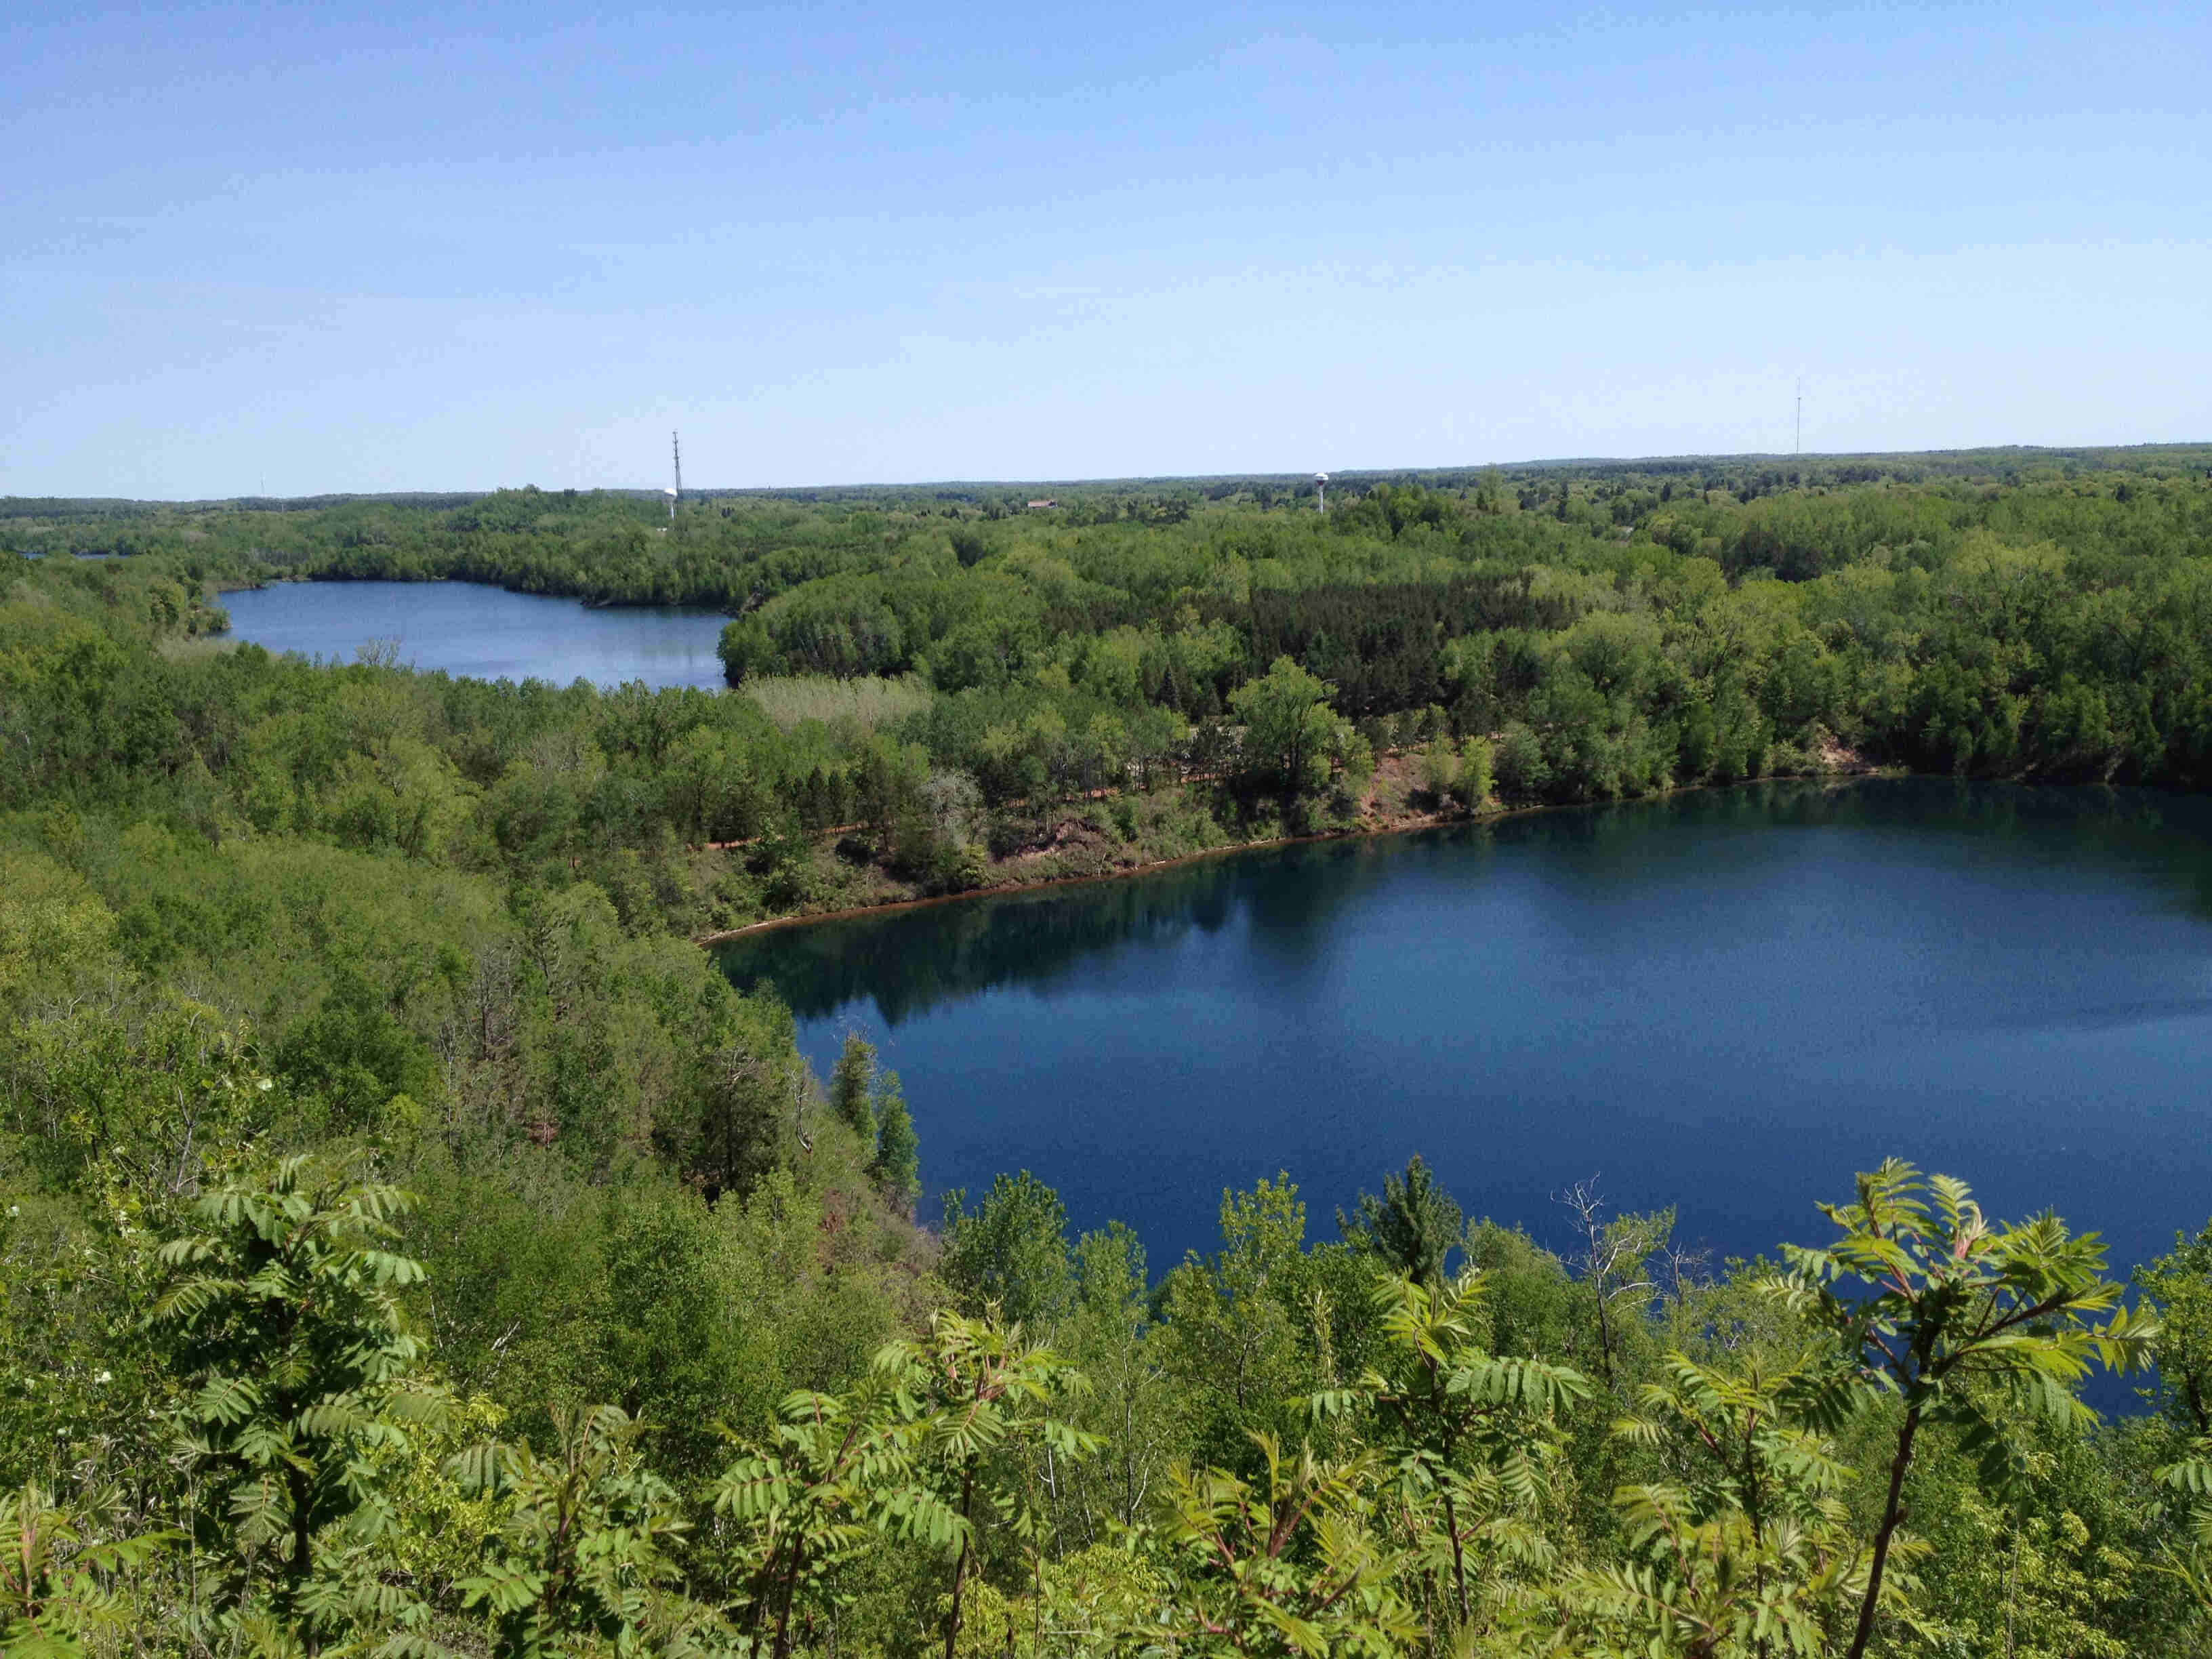 Hilltop view of 2 lakes, completely surrounded by a thick, green forest